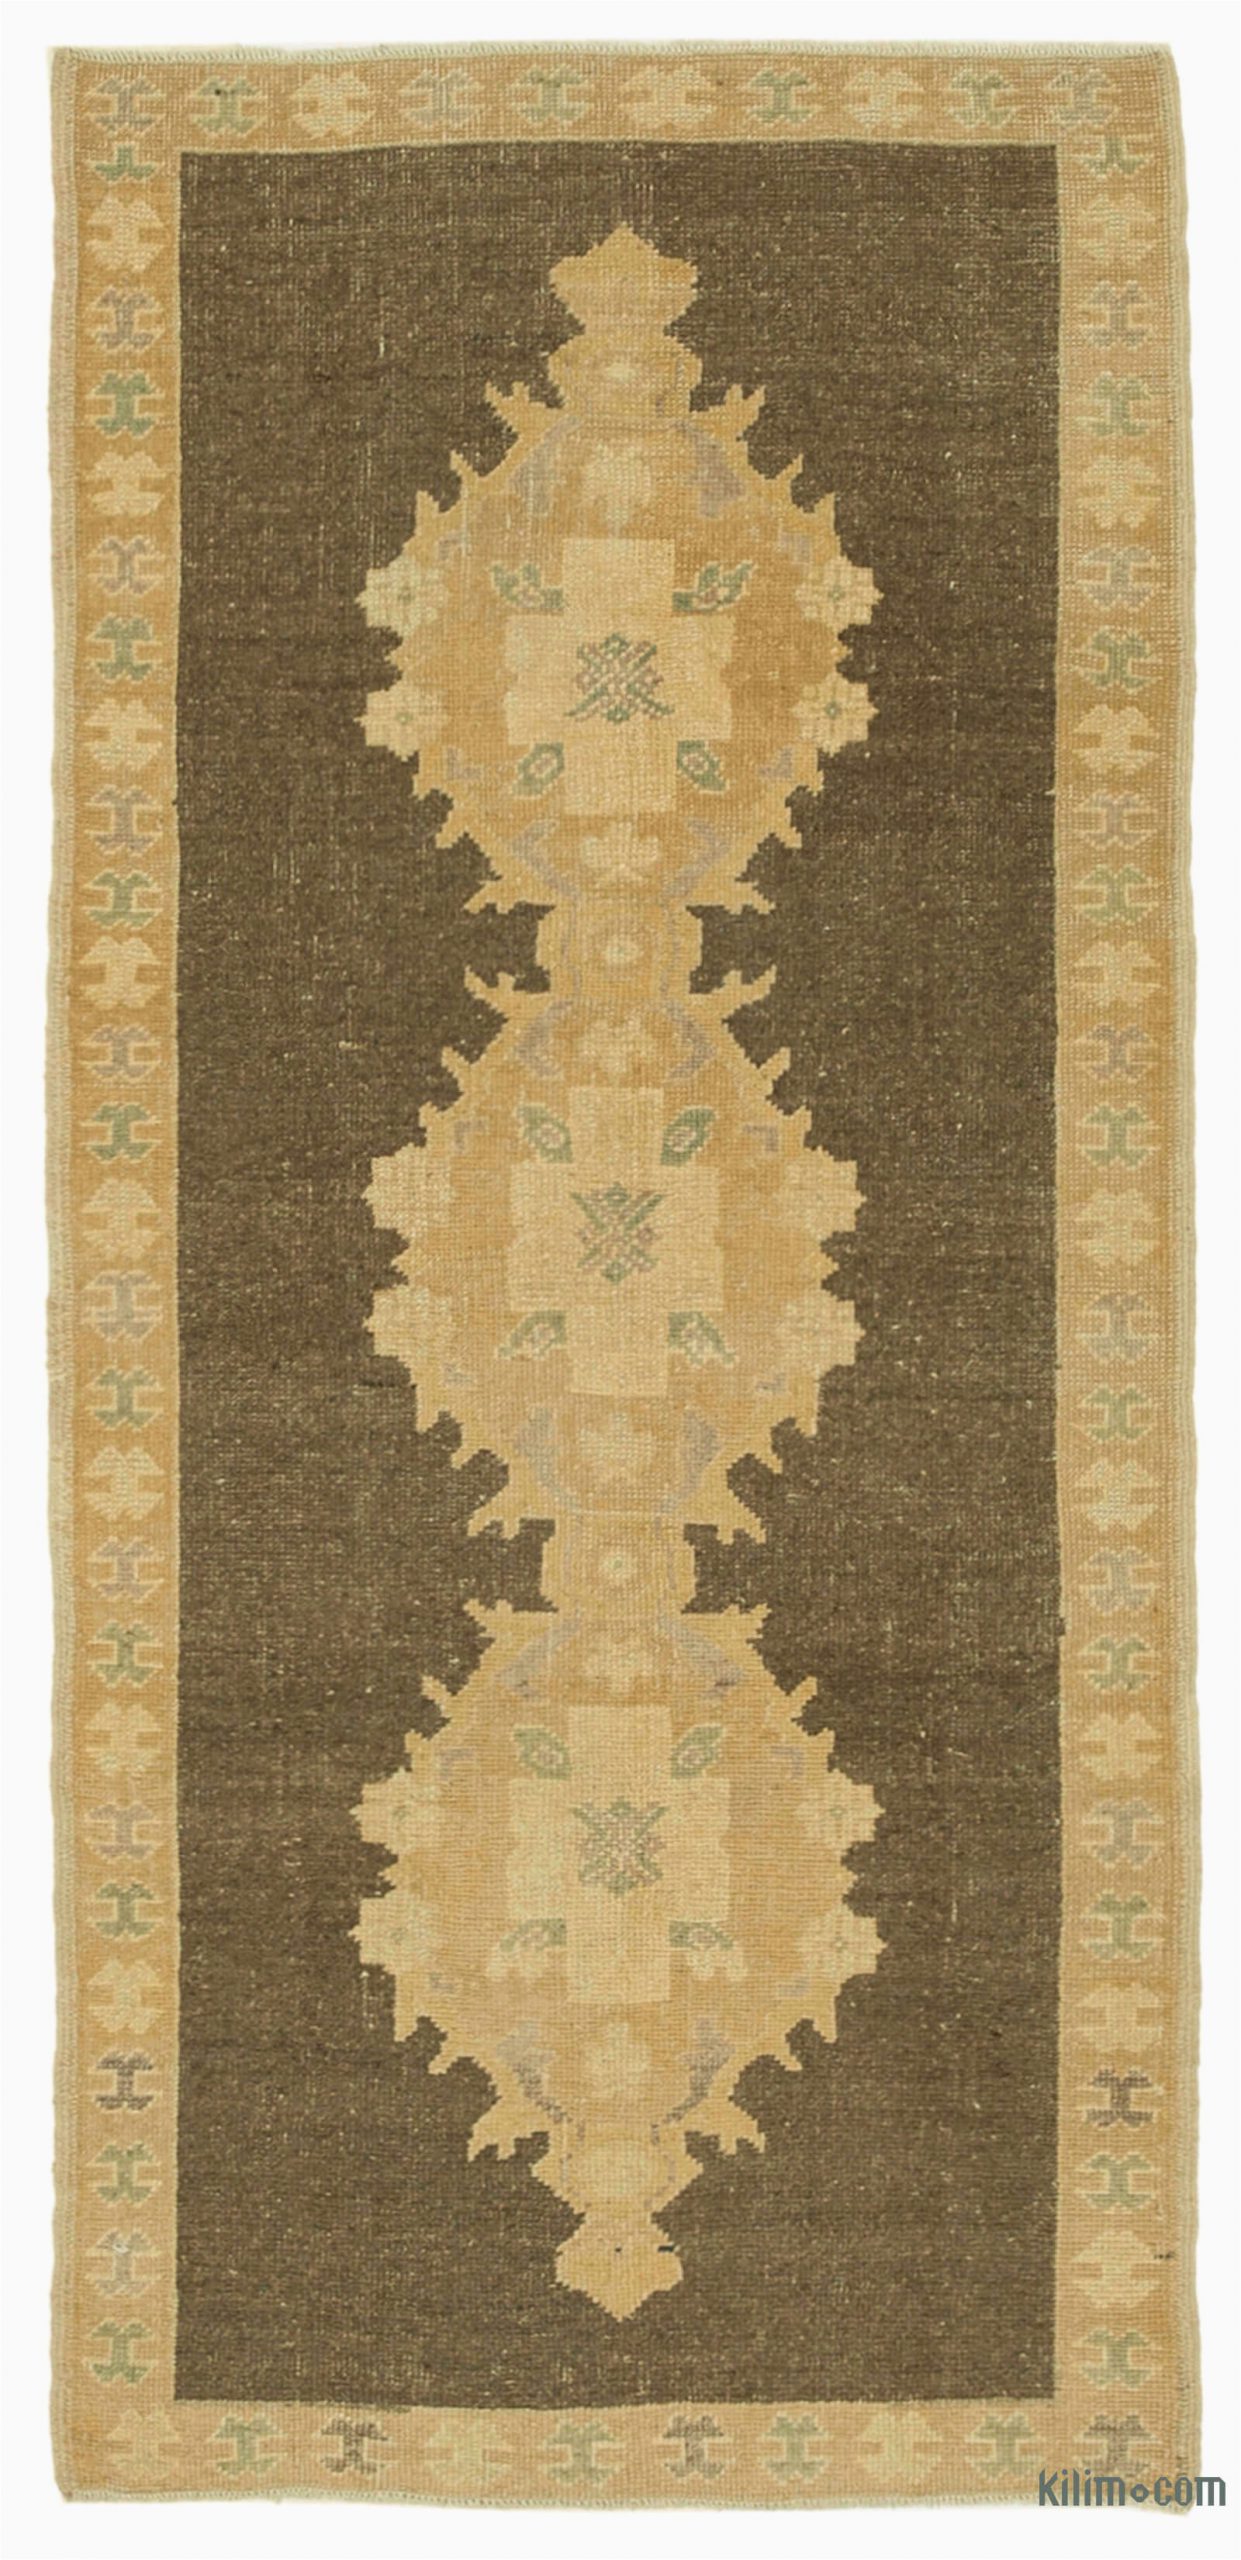 36 X 36 area Rug Beige Brown All Wool Hand Knotted Vintage area Rug 3 X 6 6" 36 In X 78 In